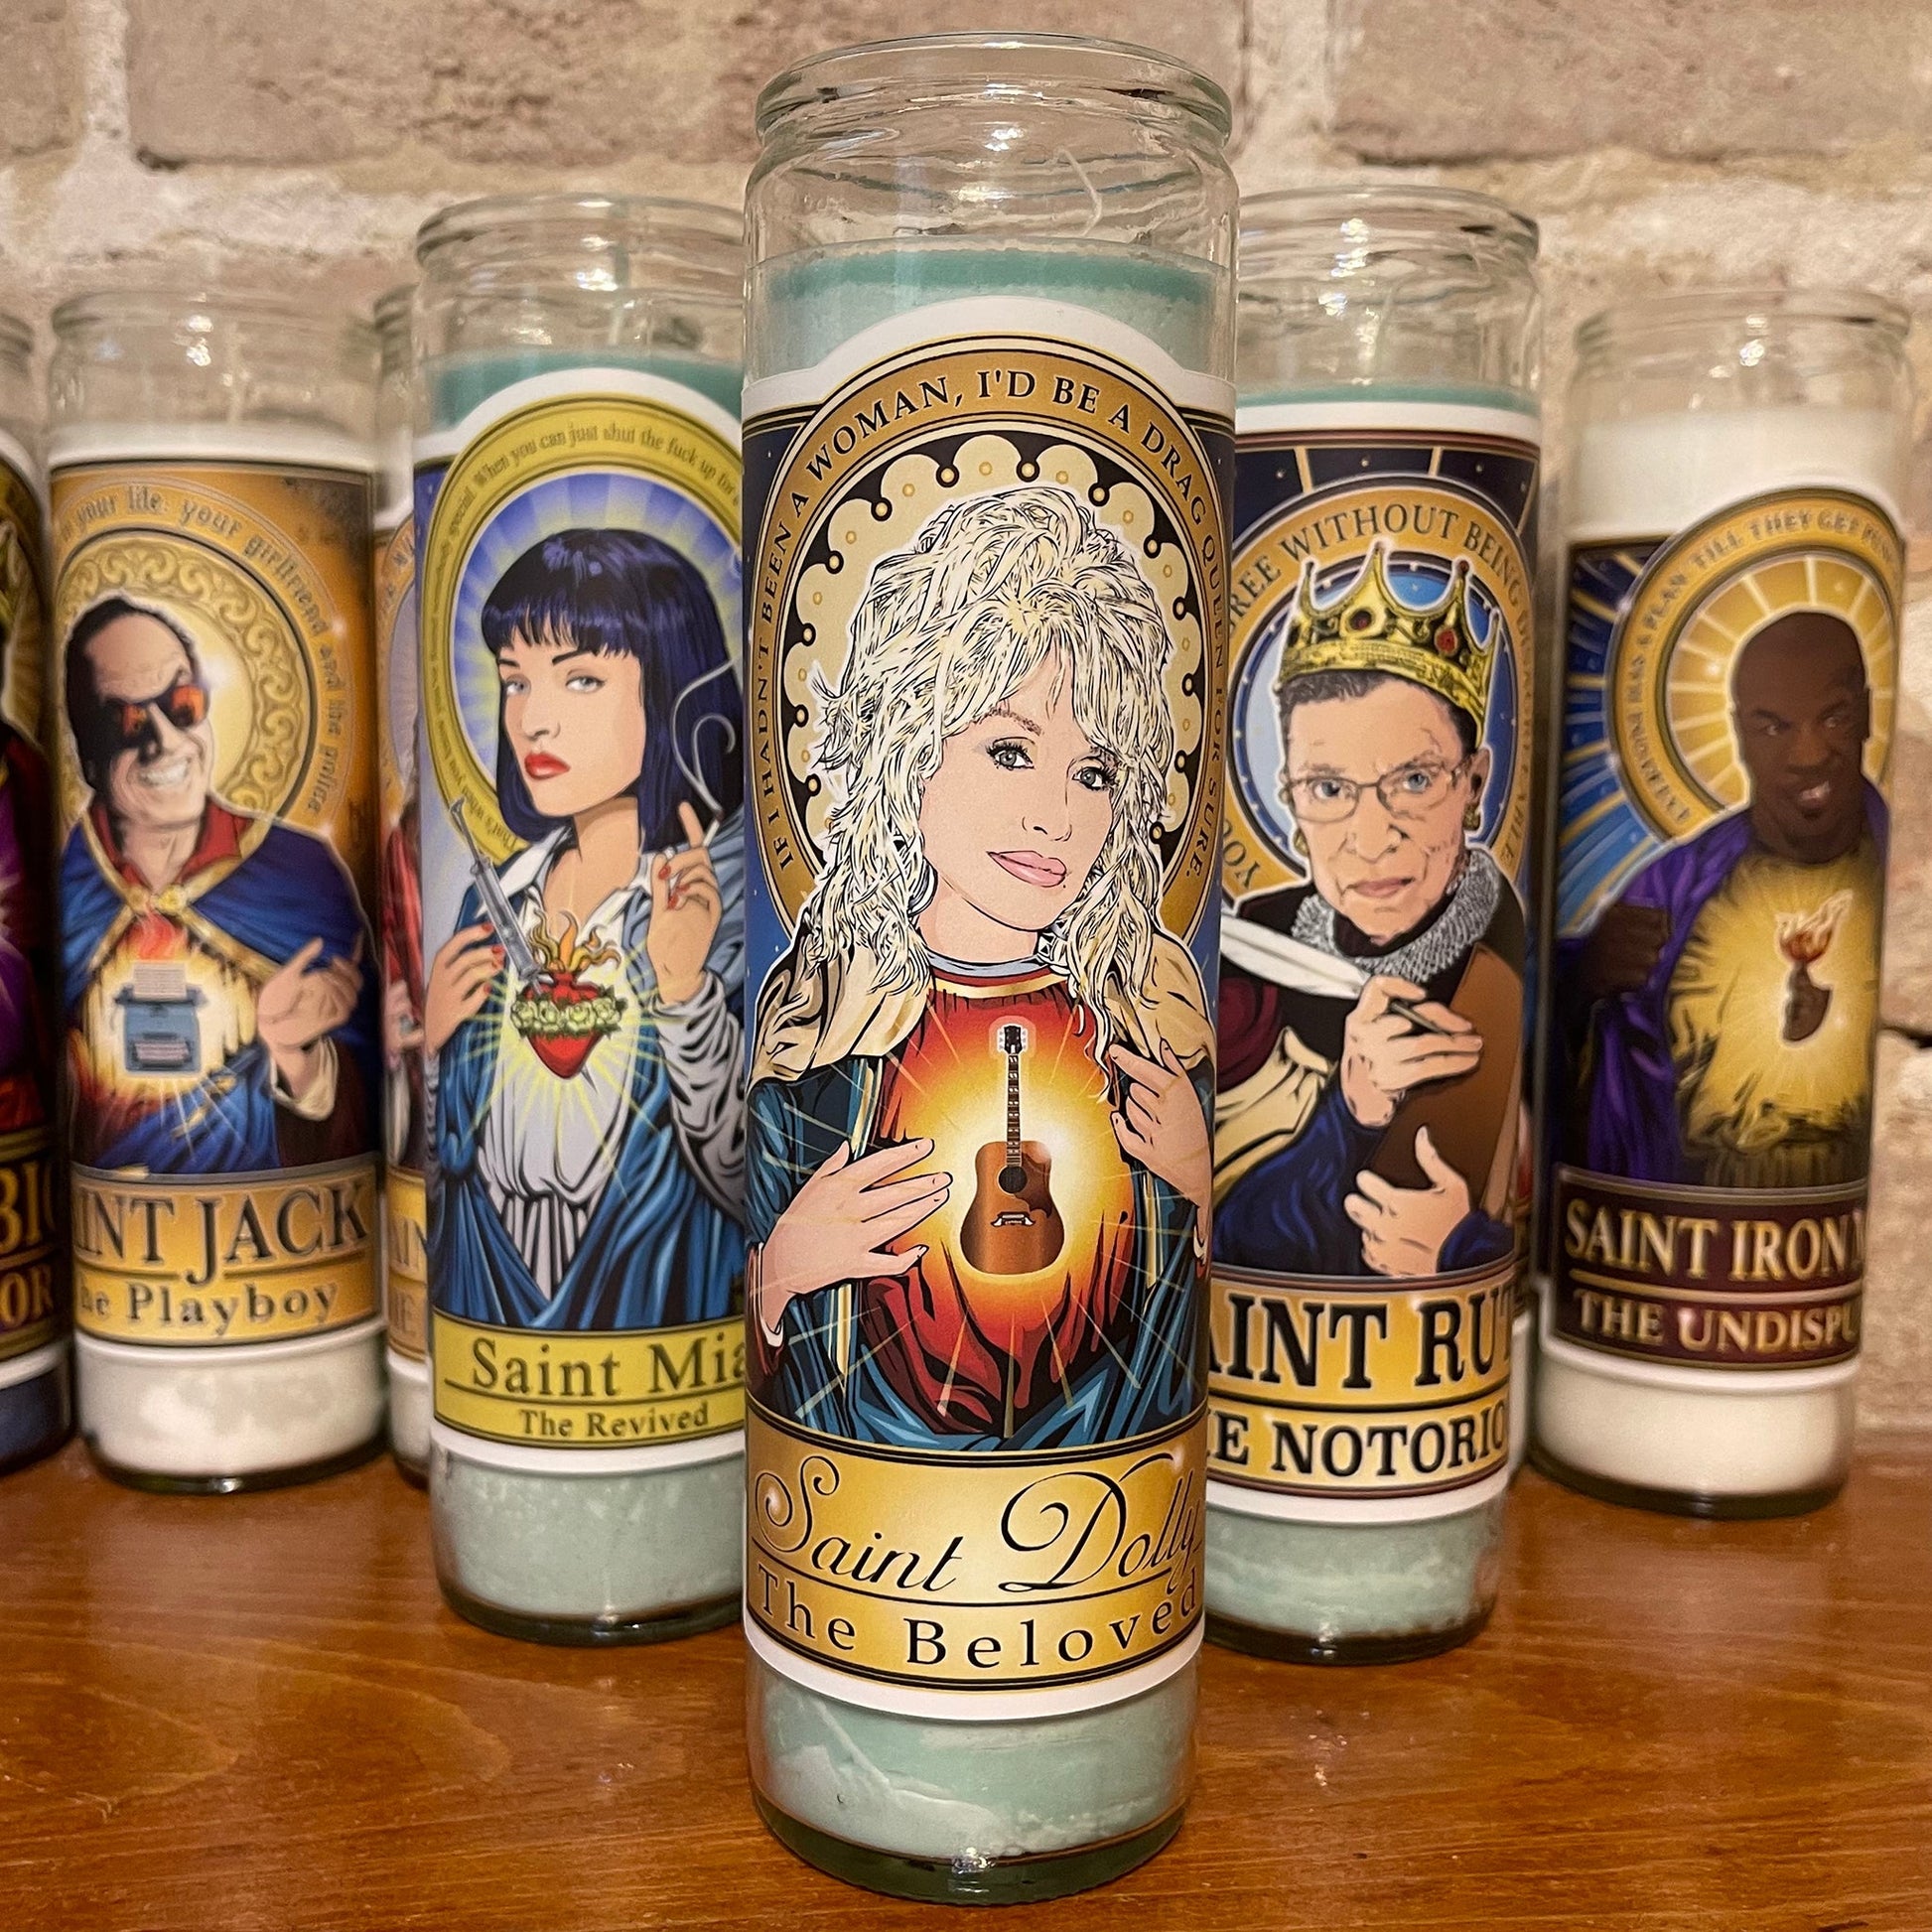 Saint Dolly The Beloved Candle Cleaverandblade.com